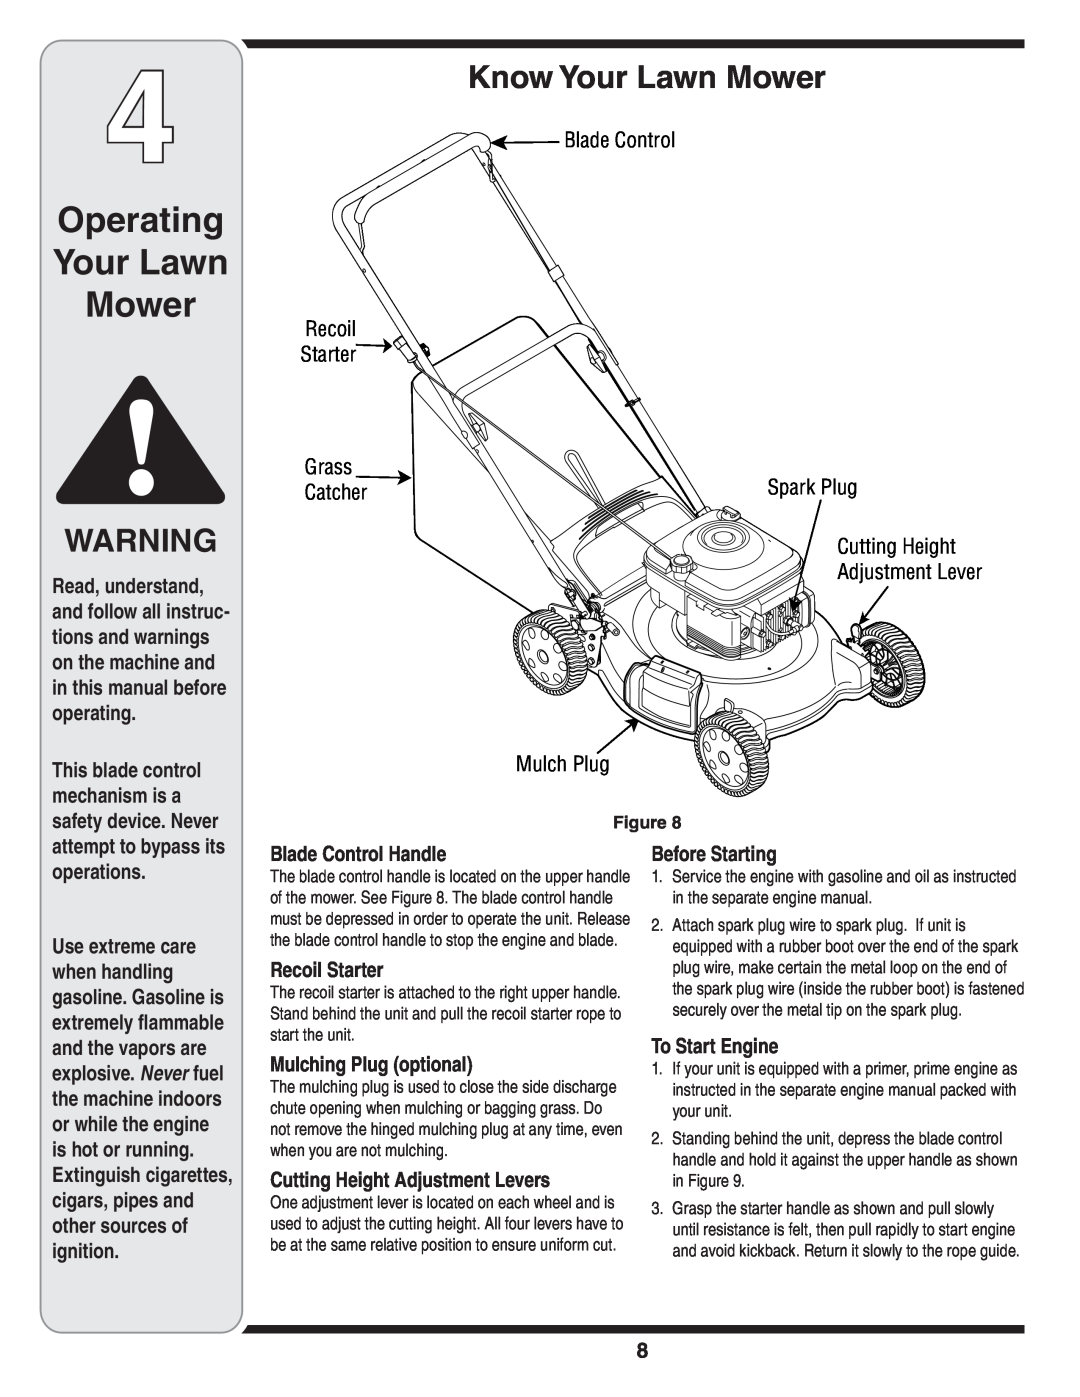 MTD Series 400 Operating Your Lawn Mower, Know Your Lawn Mower, Blade Control Handle, Recoil Starter, Before Starting 